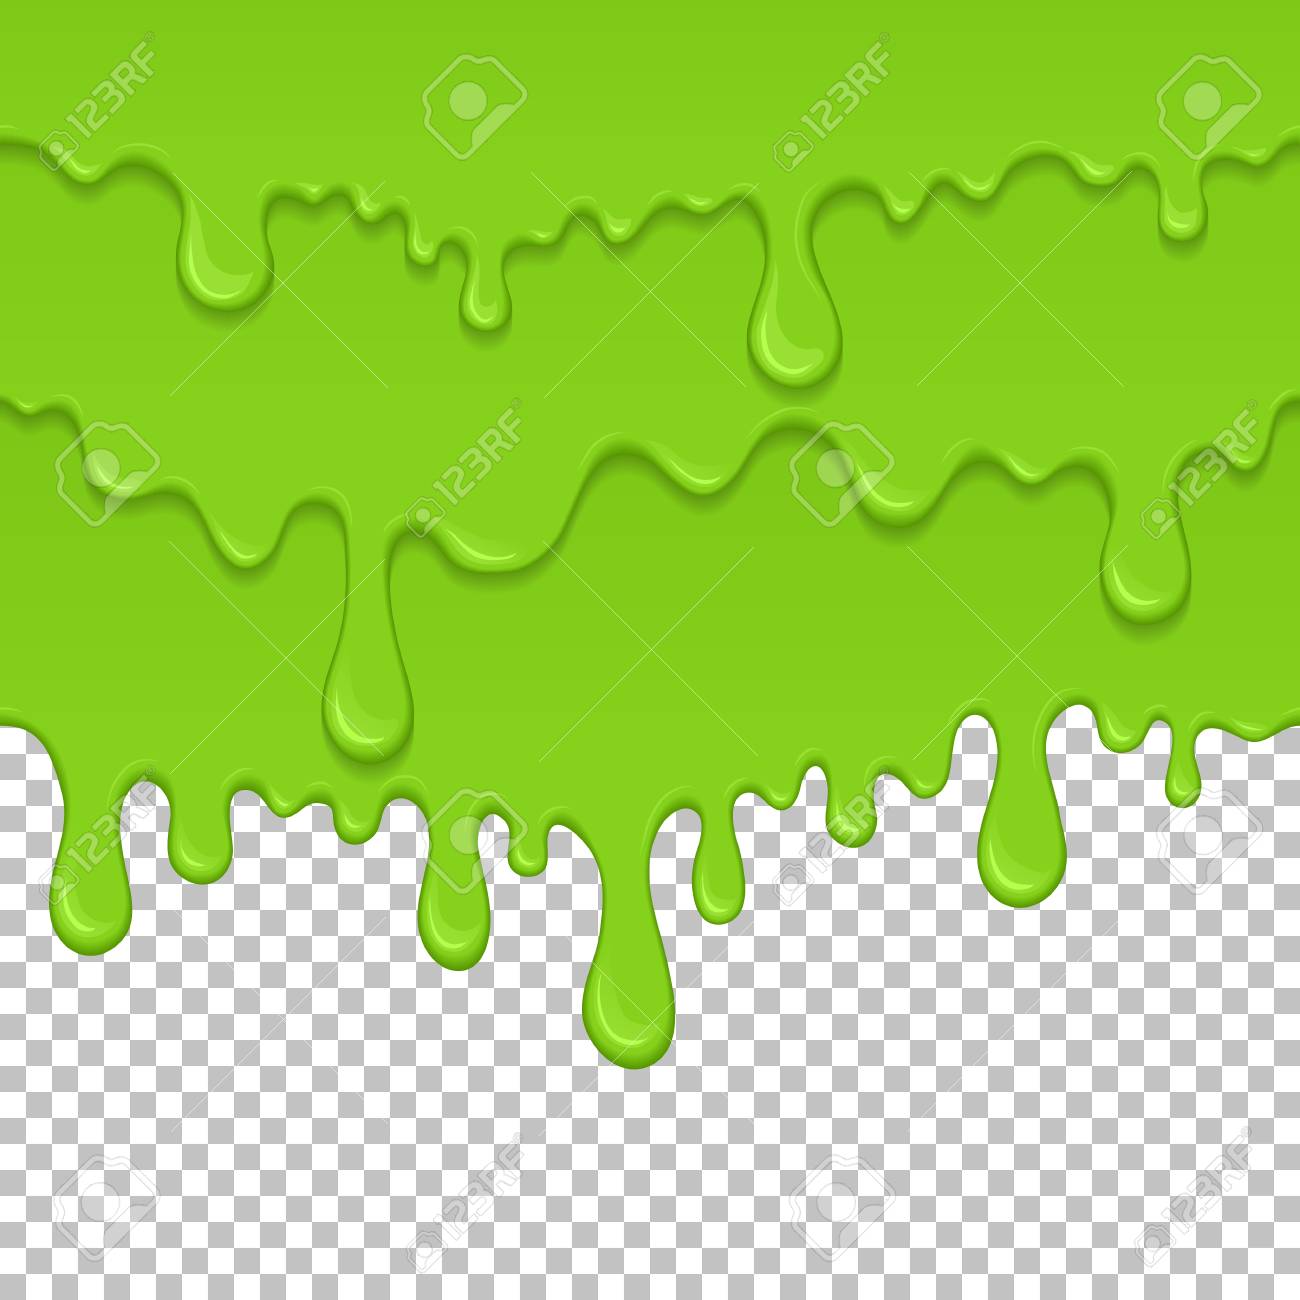 Green Sticky Liquid Seamless Element Realistic Dripping Slime